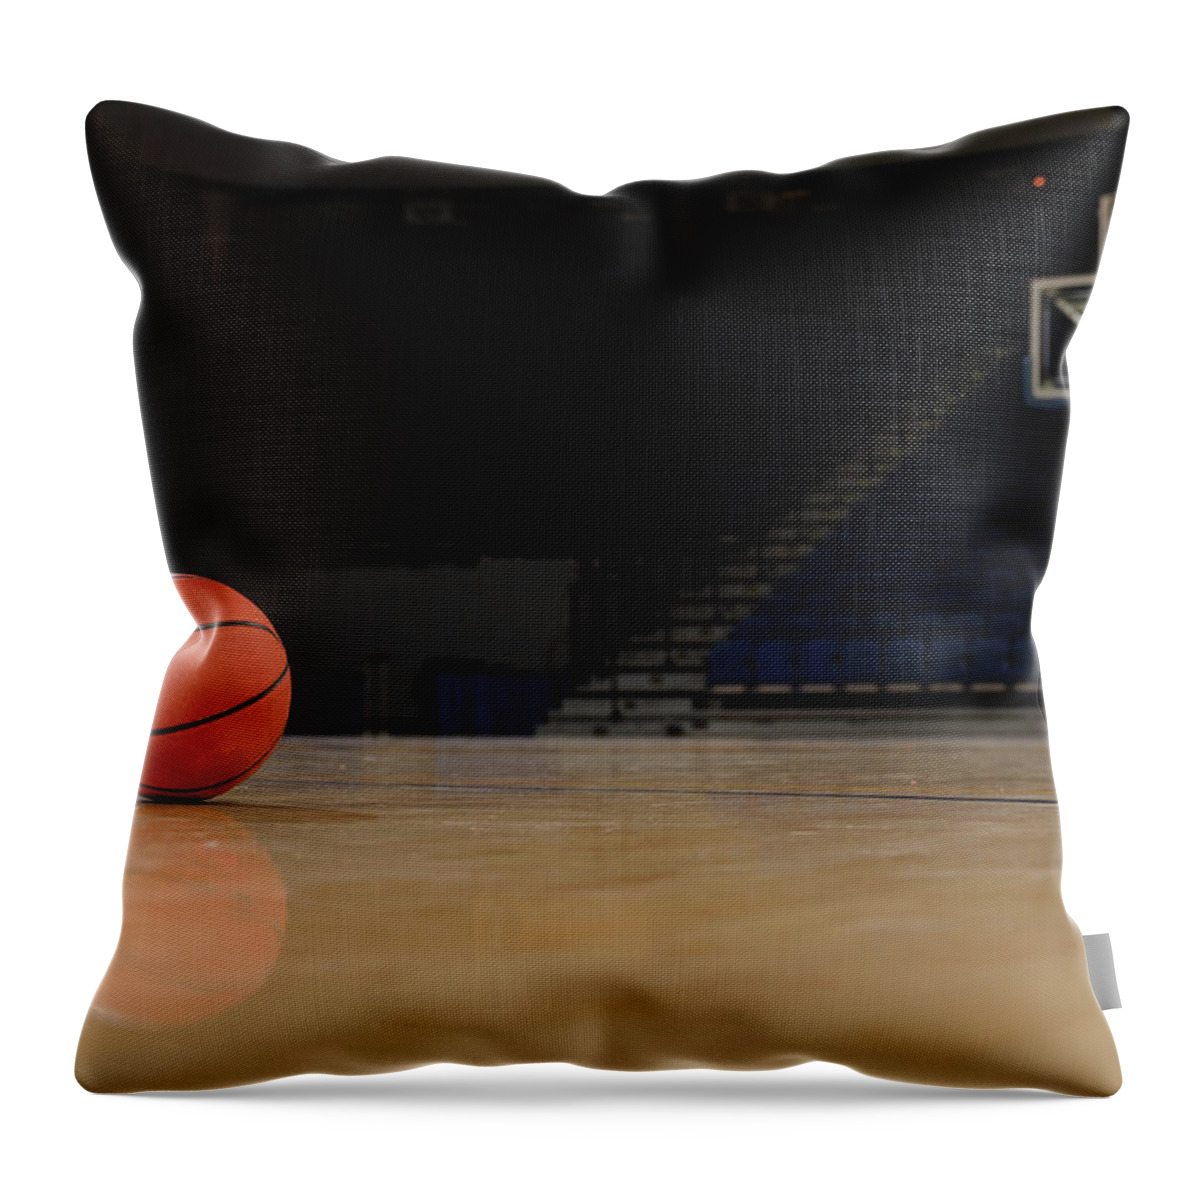 Orange Color Throw Pillow featuring the photograph Ball And Basketball Court by Matt brown